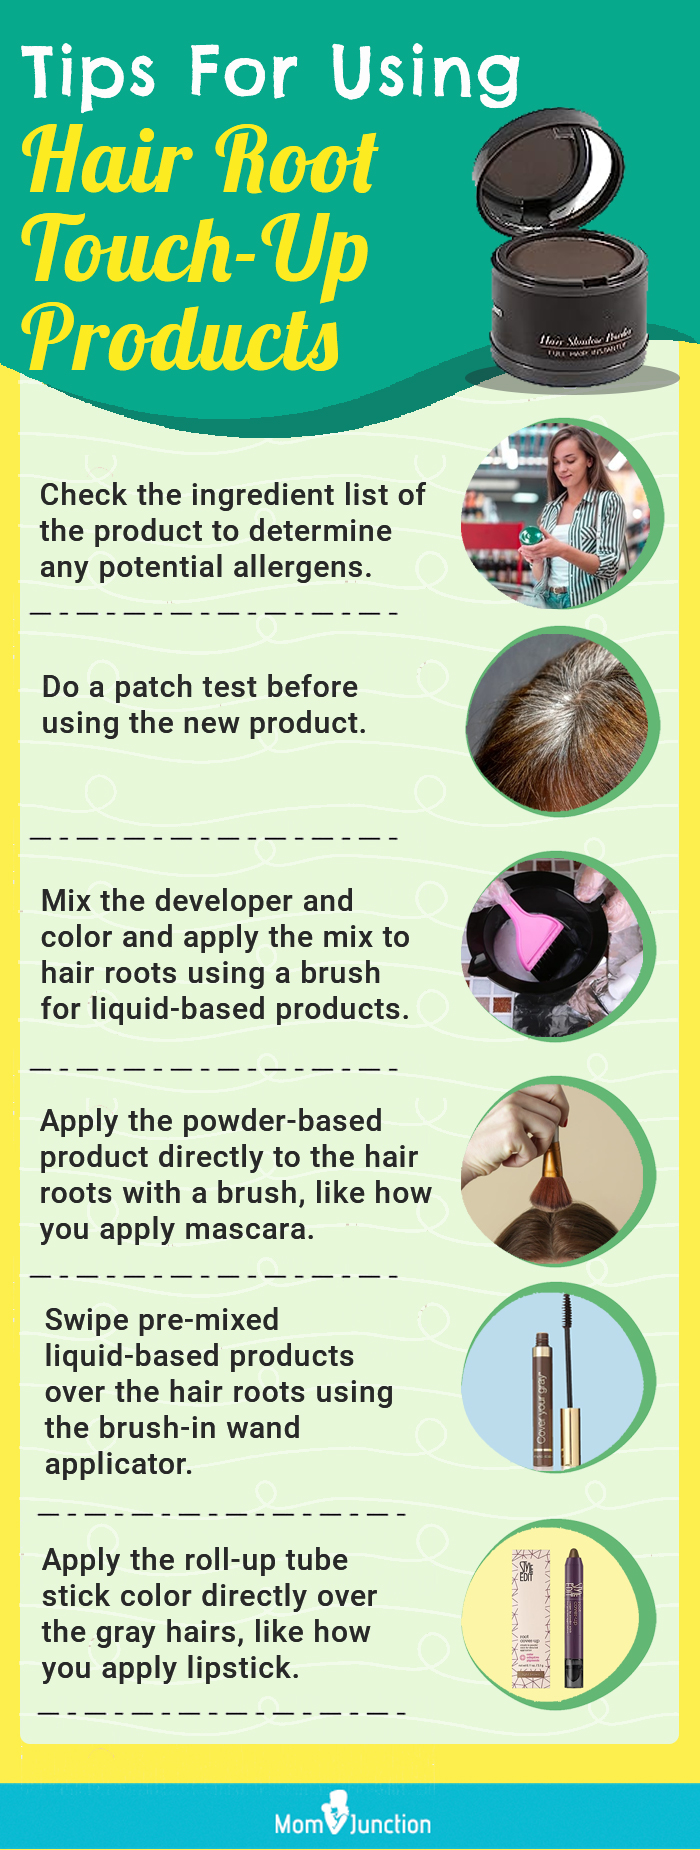 Tips For Using Hair Root Touch-Up Products(infographic)